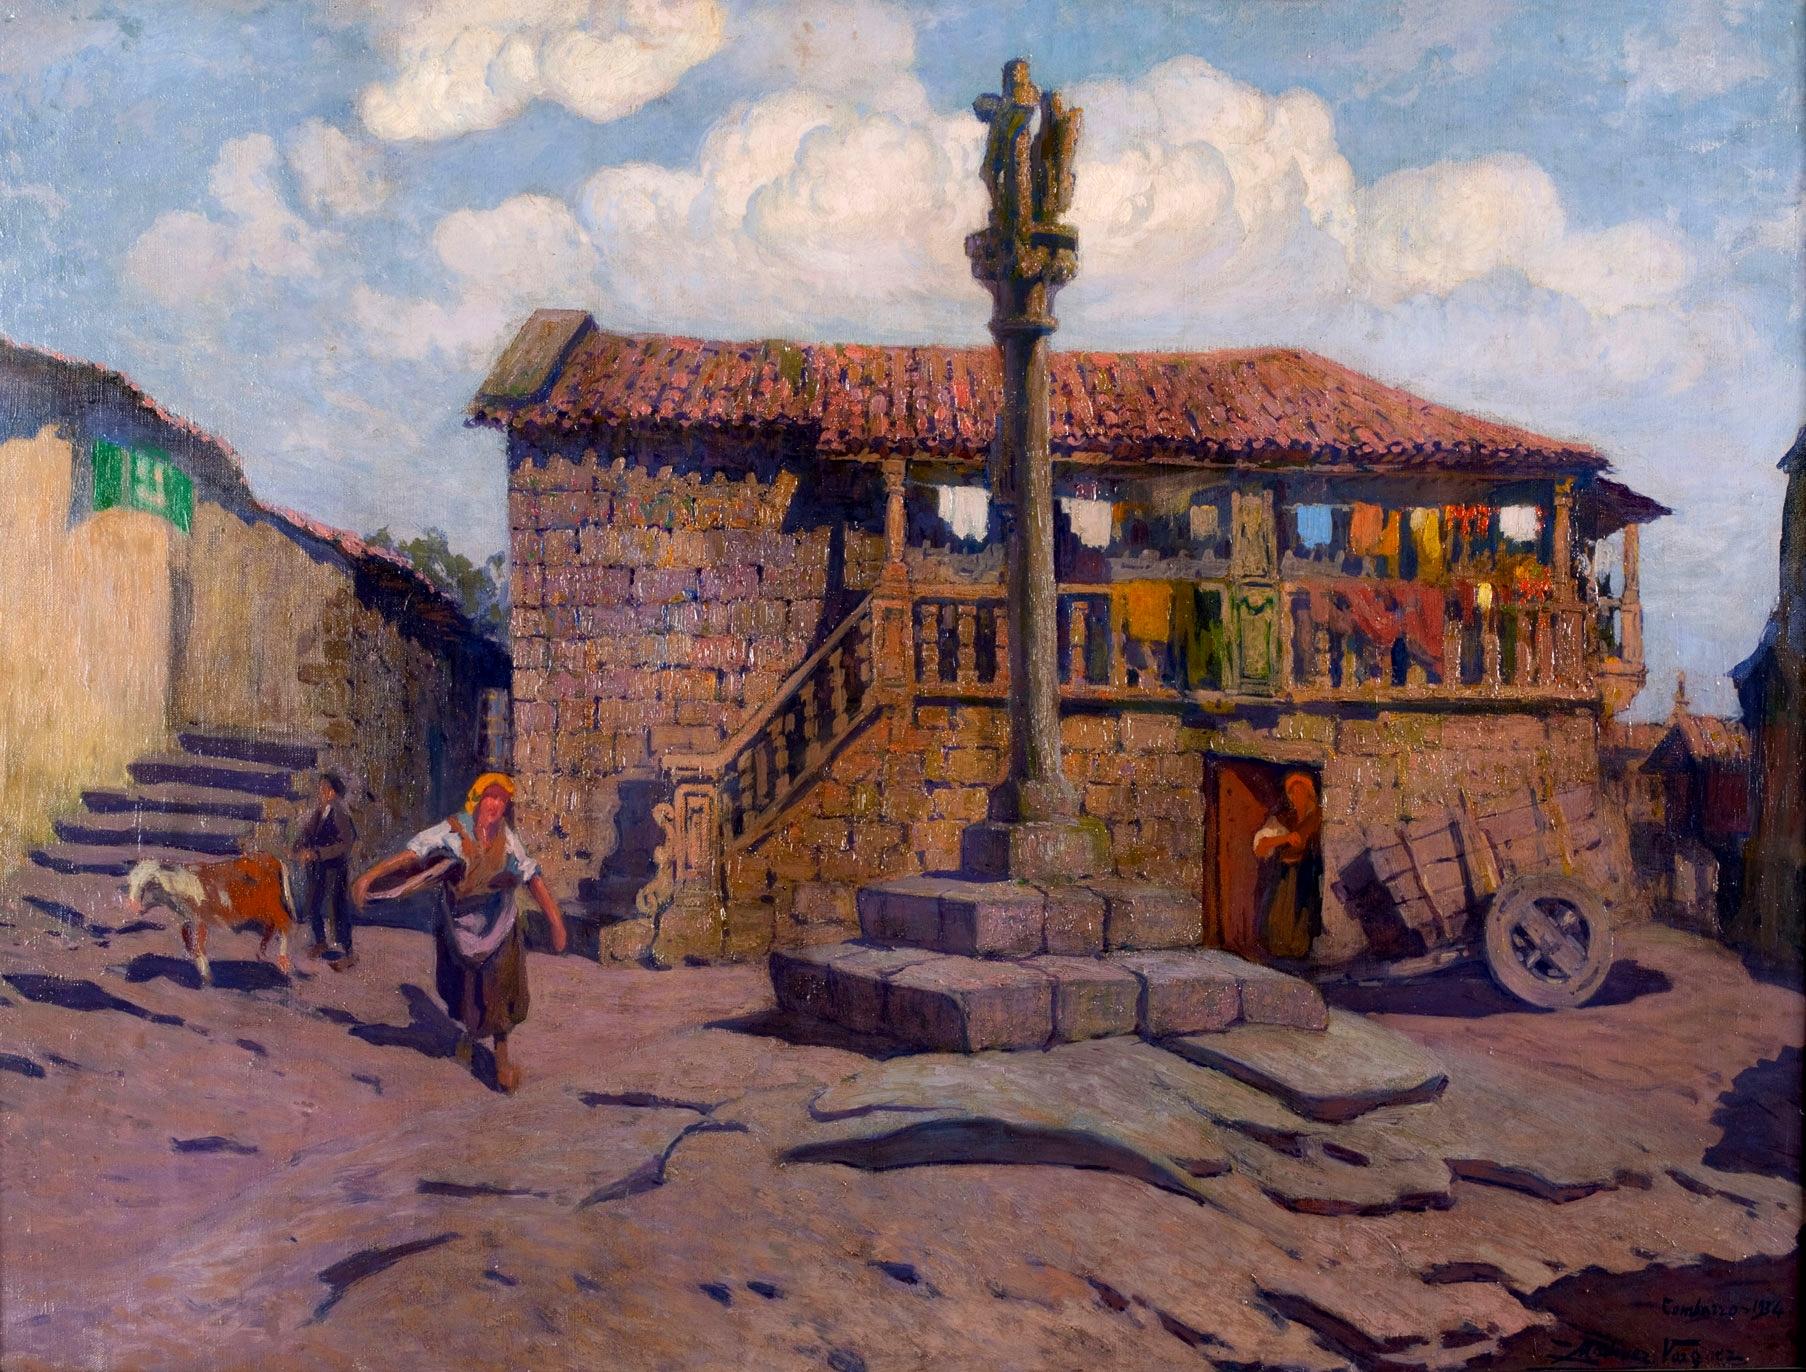 Landscape of this town of Pontevedra, made by Eduardo Martínez Vázquez (Fresnedilla, Ávila, 1886 Madrid, 1971), a landscape painter who studied at the School of Fine Arts of San Fernando in Madrid, along with Solana, Zuloaga, etc. He was known,